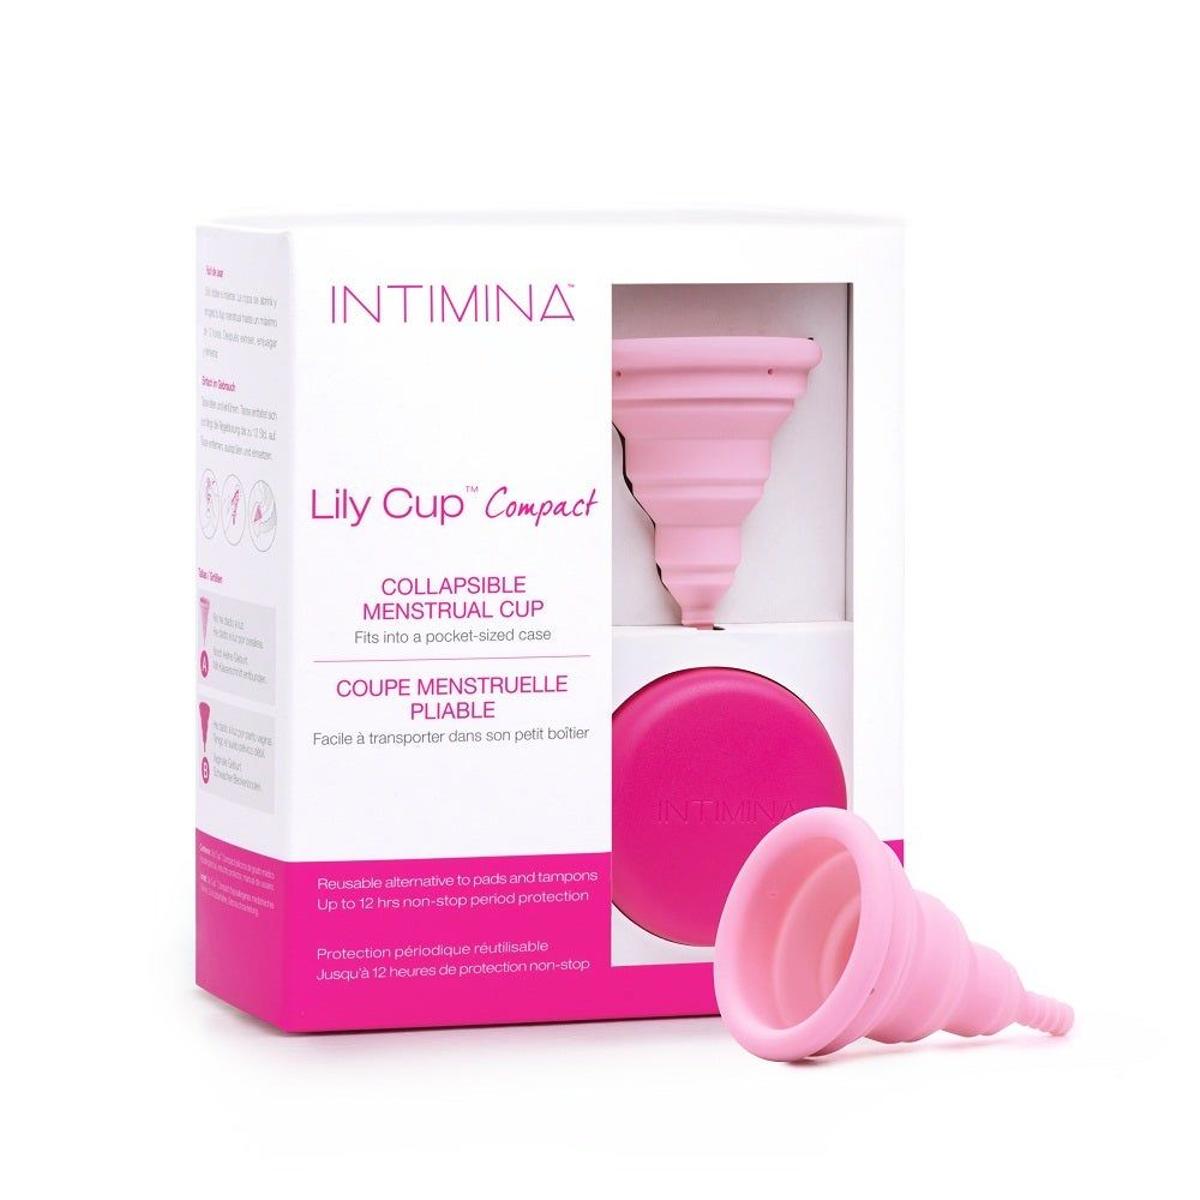 Copa menstrual - Intimina Lily Cup Compact